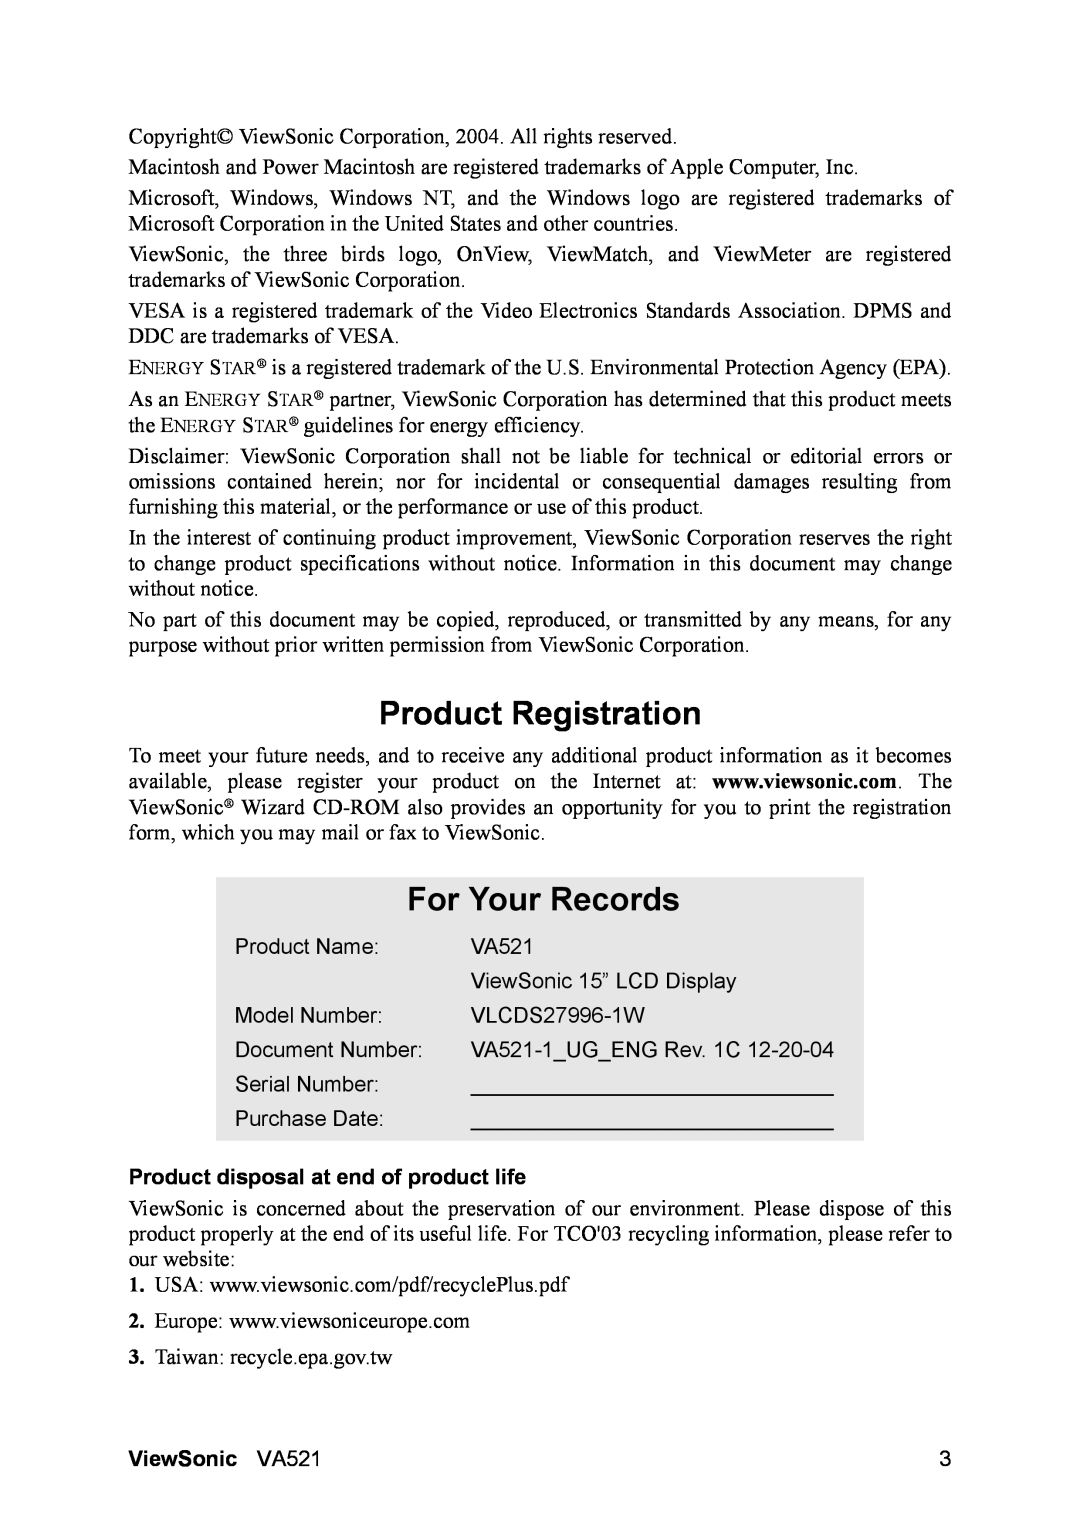 ViewSonic VA521 manual Product Registration, For Your Records, Product Name, ViewSonic 15” LCD Display, Model Number 